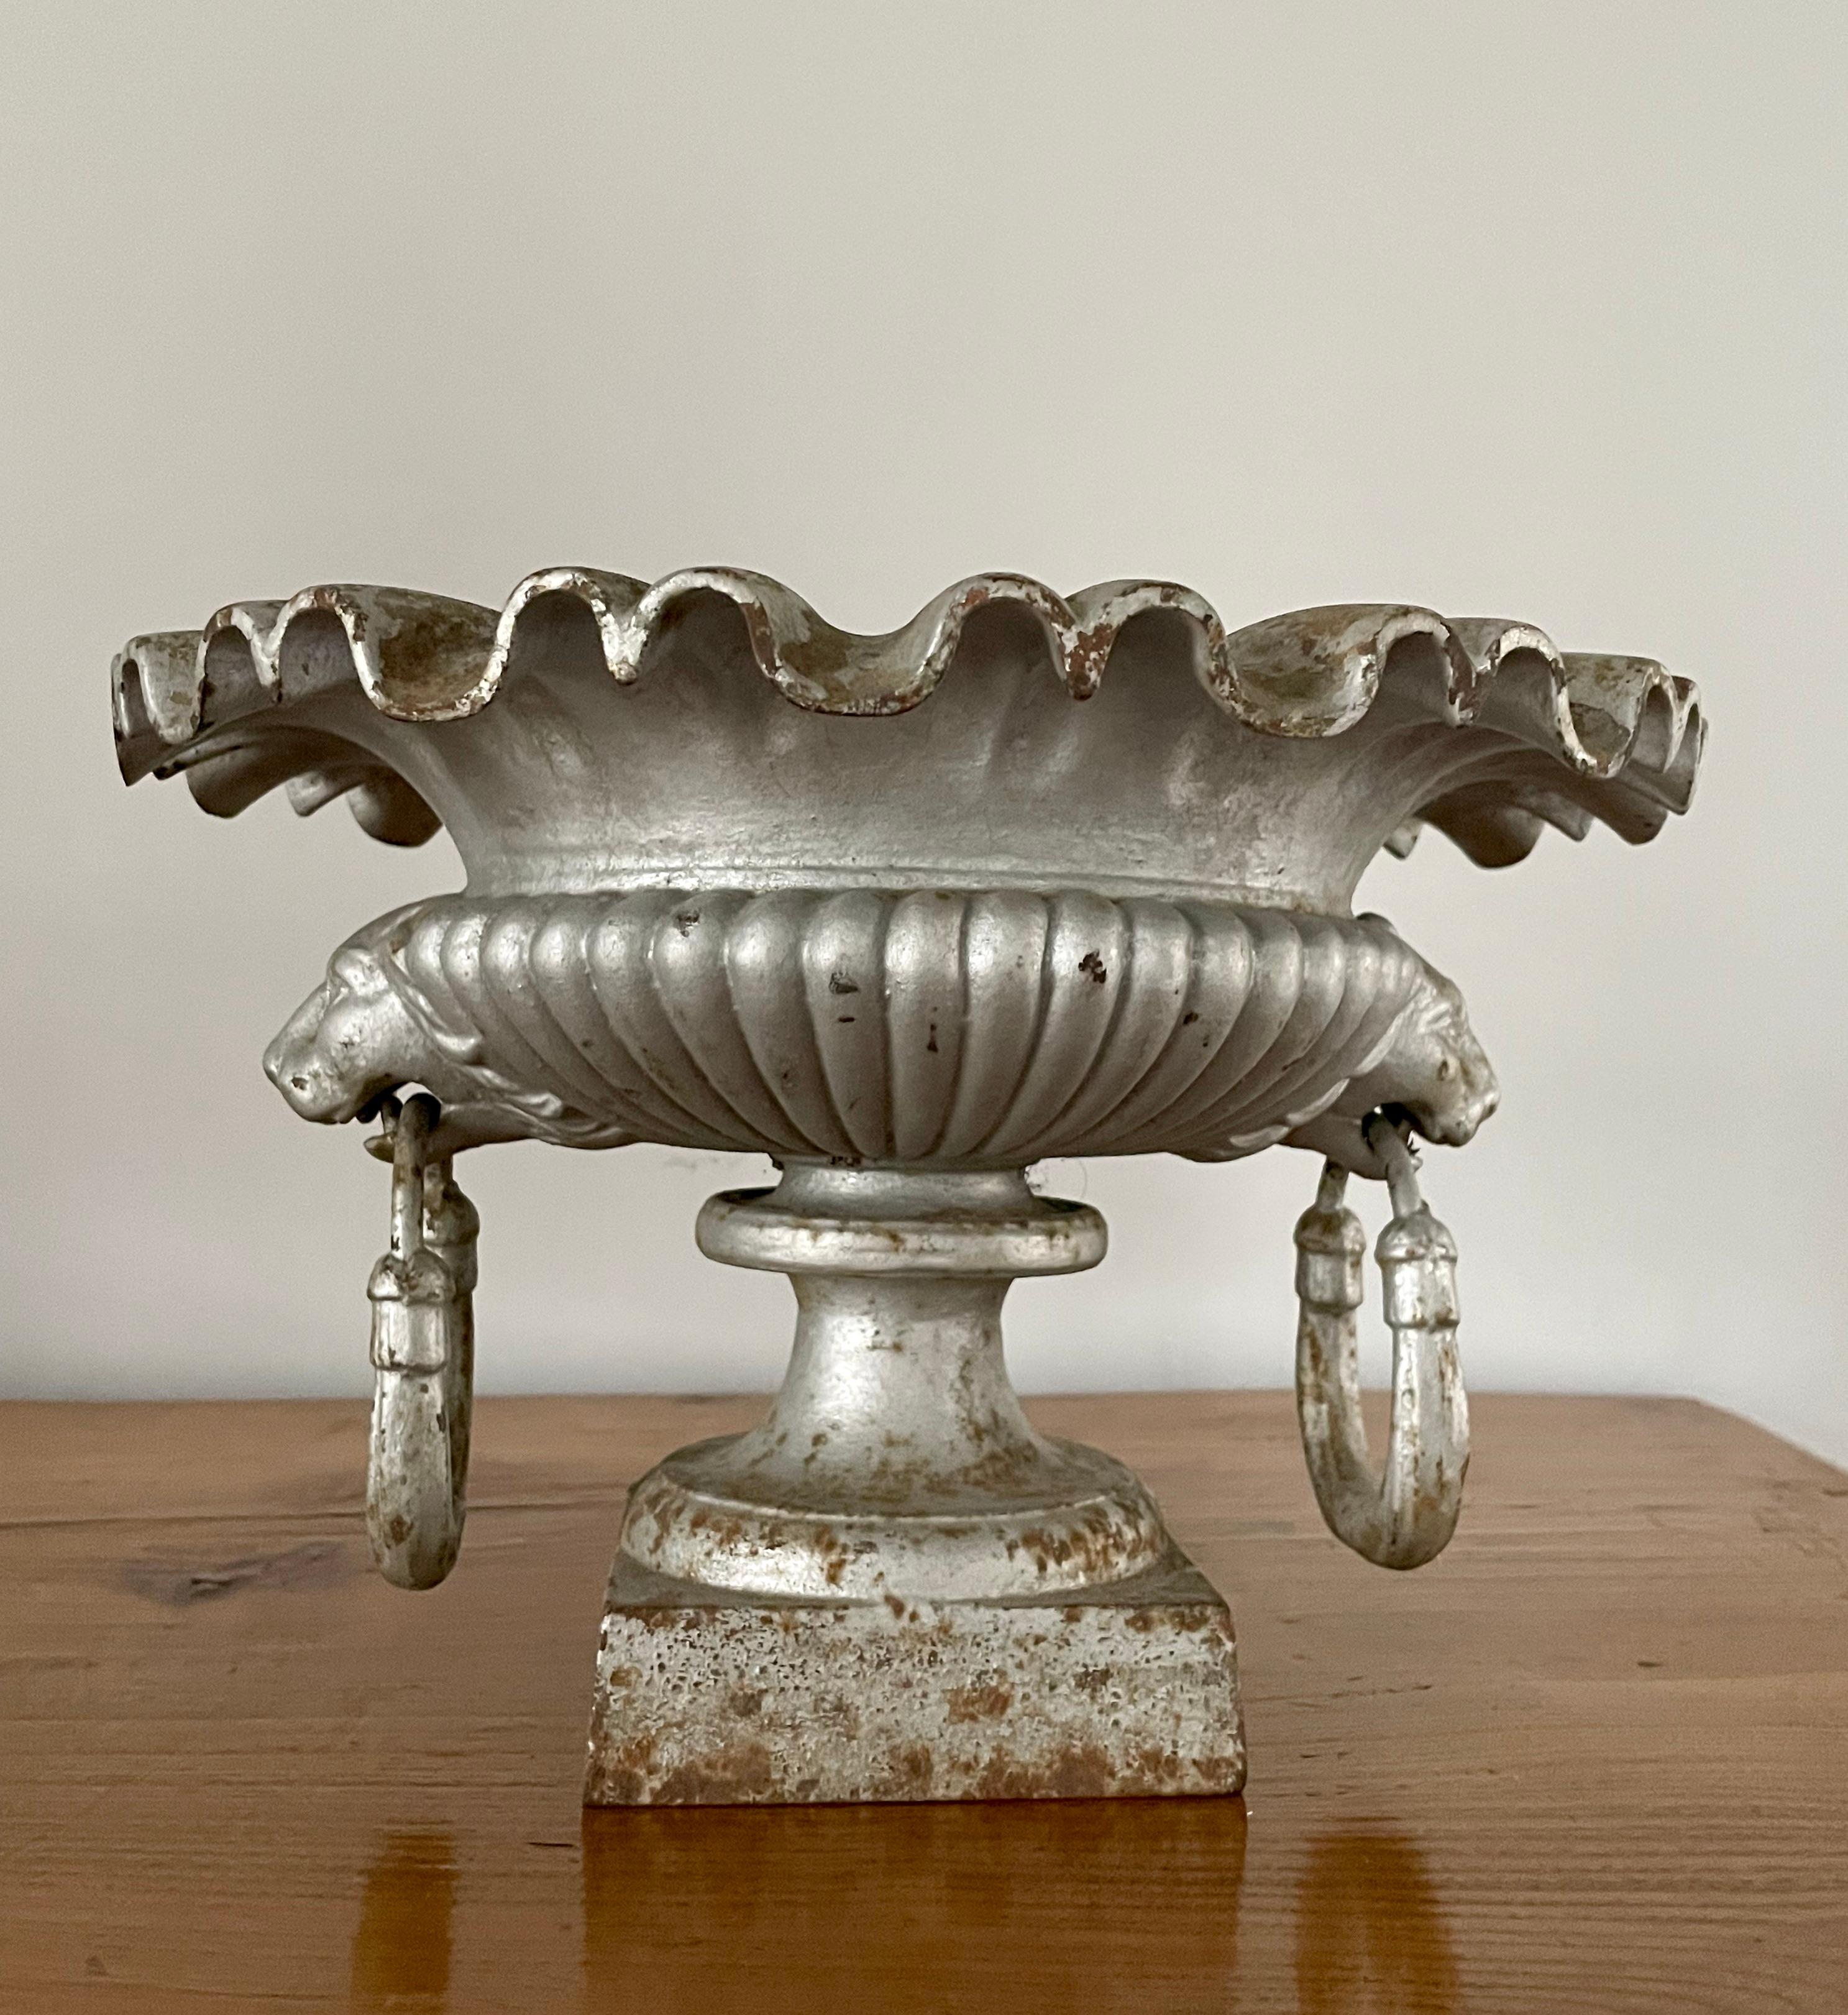 Rare Pair of Small French 19th C Cast Iron Urns with Lion Heads and Ruffled Rims For Sale 1